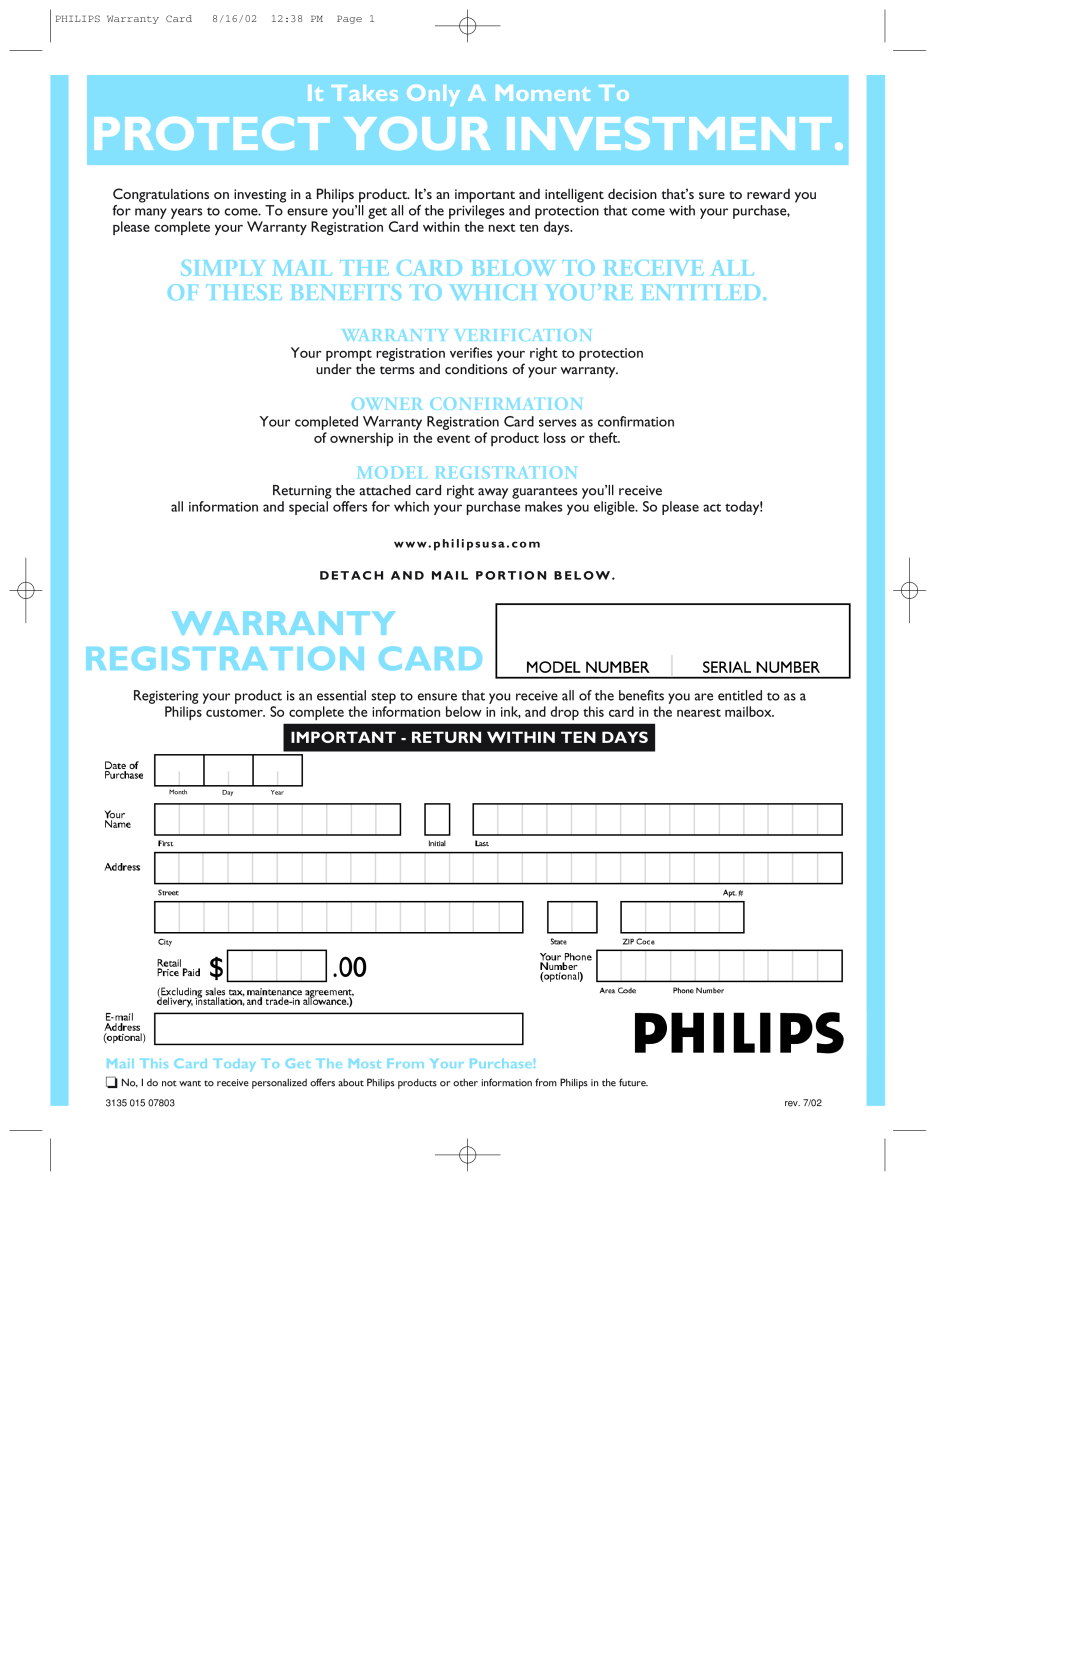 Philips 107C65 Protect Your Investment, Warranty Registration Card, It Takes Only A Moment To, Warranty Verification 